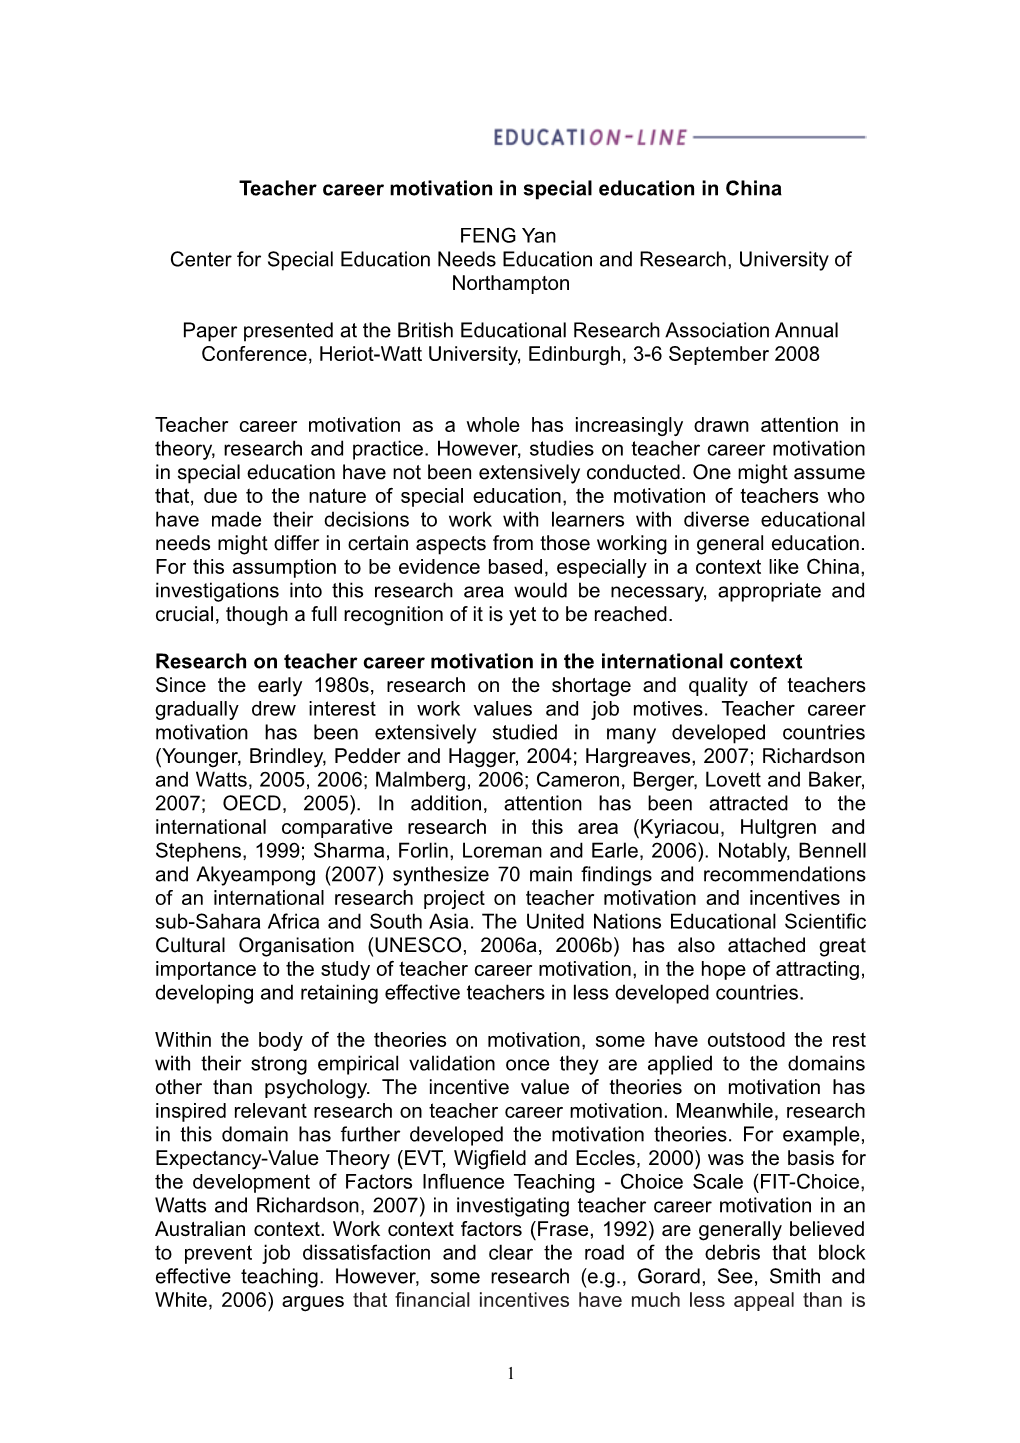 Teacher Career Motivation in Special Education in China